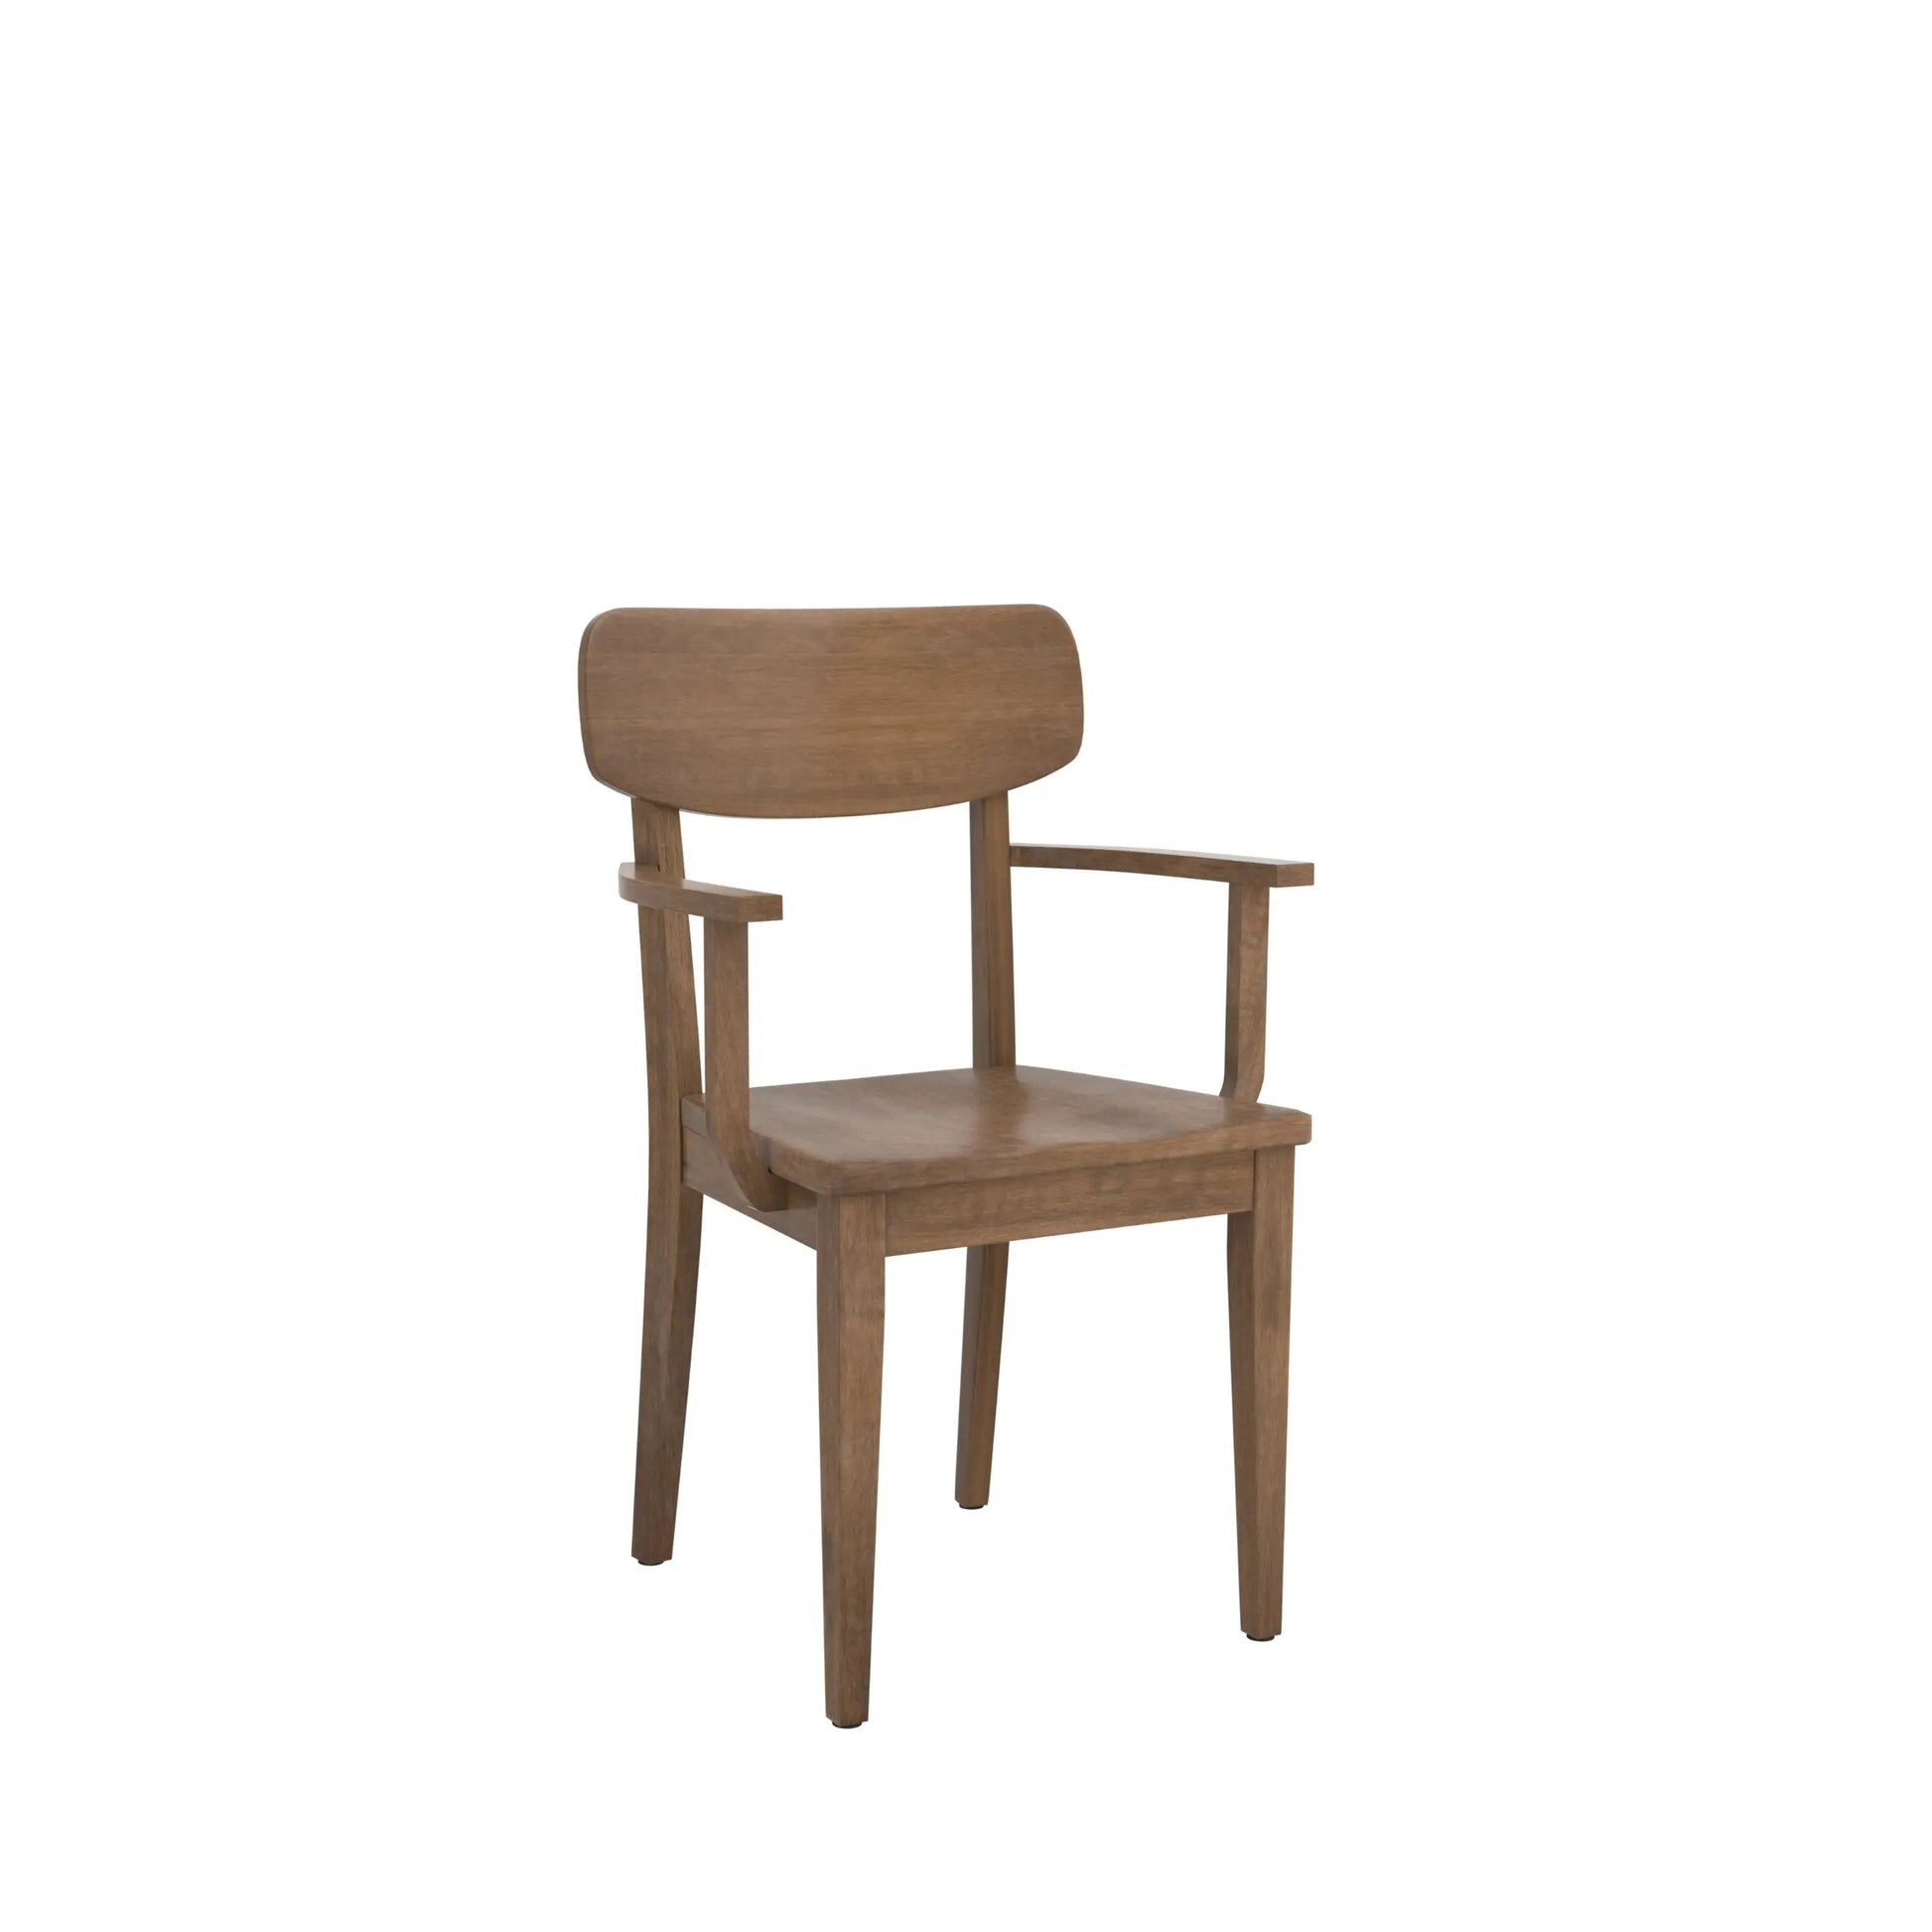 The Sylvan - Mid Century Modern Dining Chair Moderncre8ve